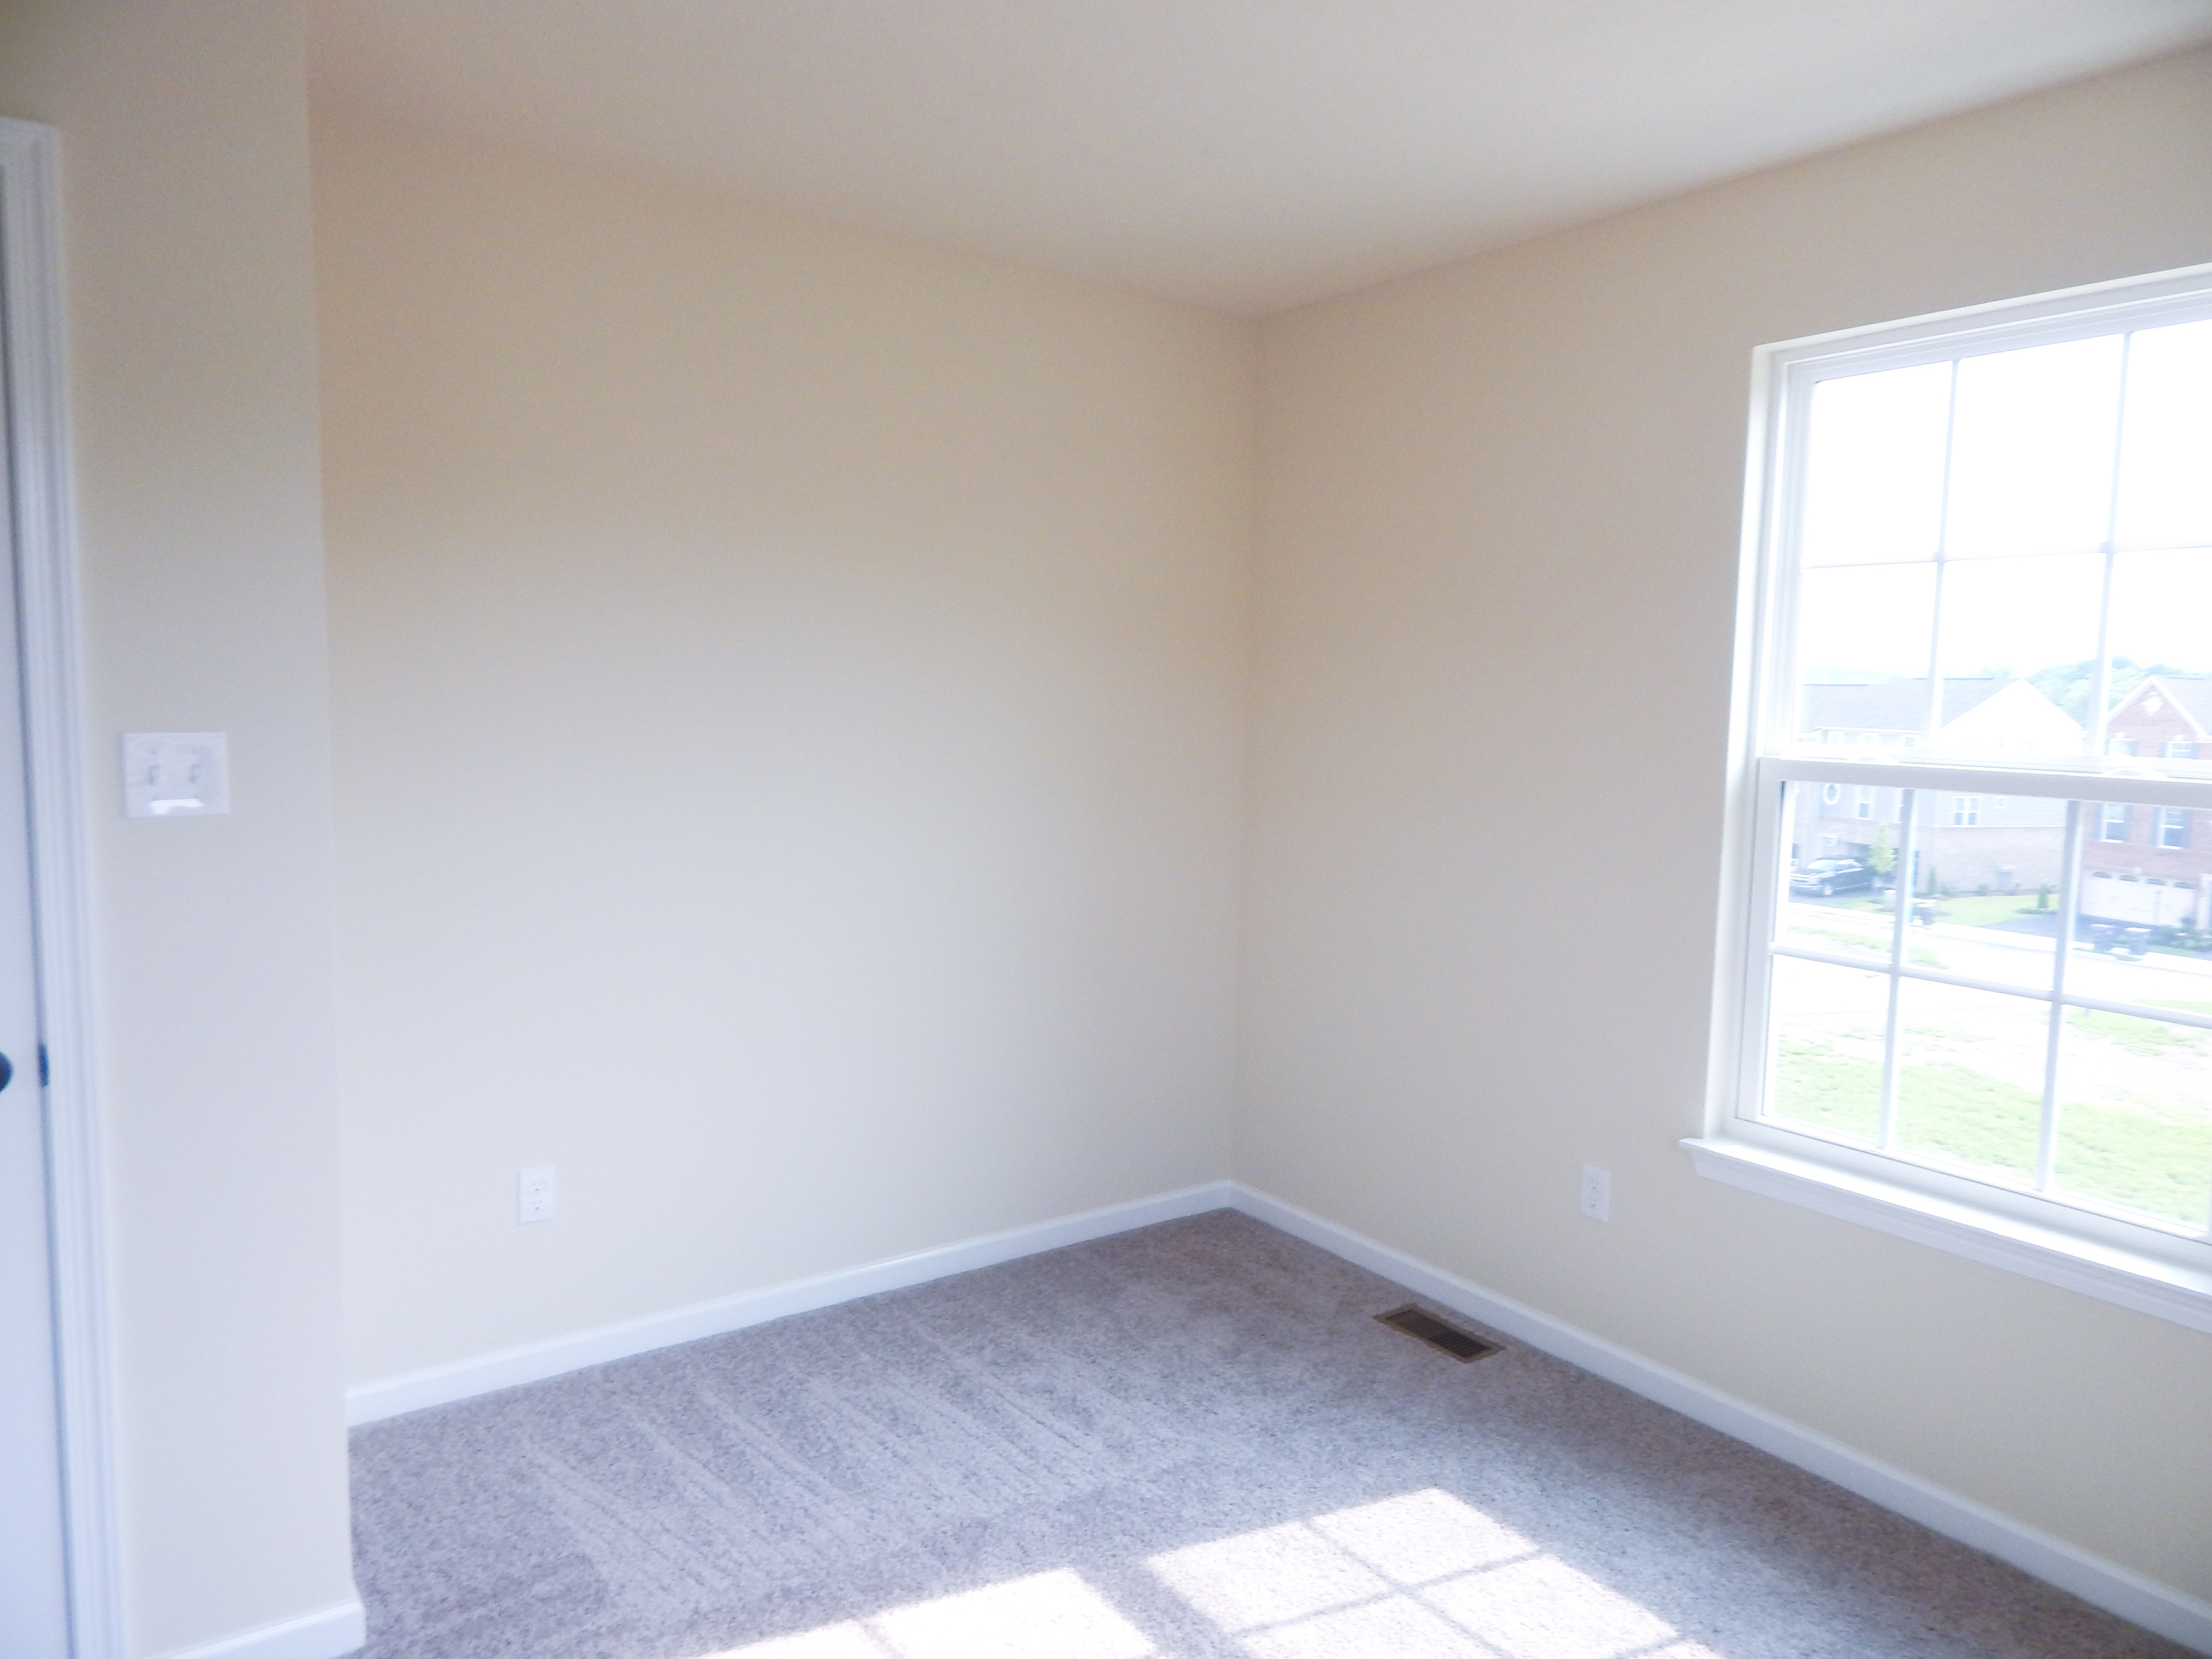 Office Second Level Ryan Homes Wexford